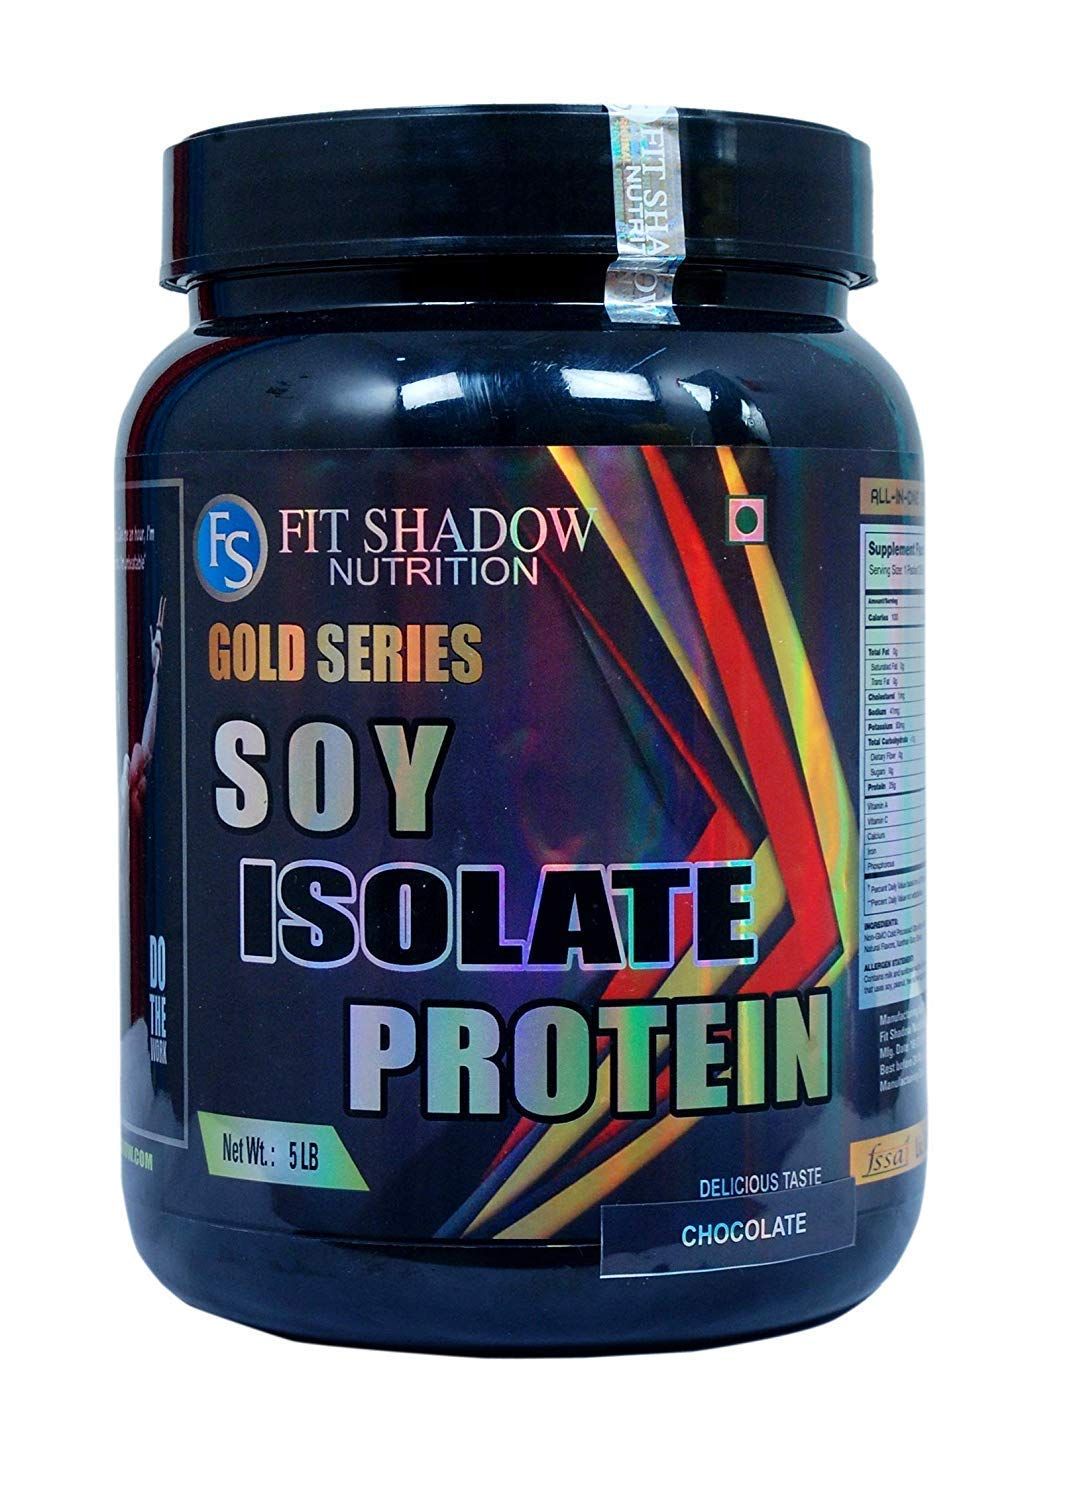 Fit Shadow Nutrition Soy Isolate Protein Image